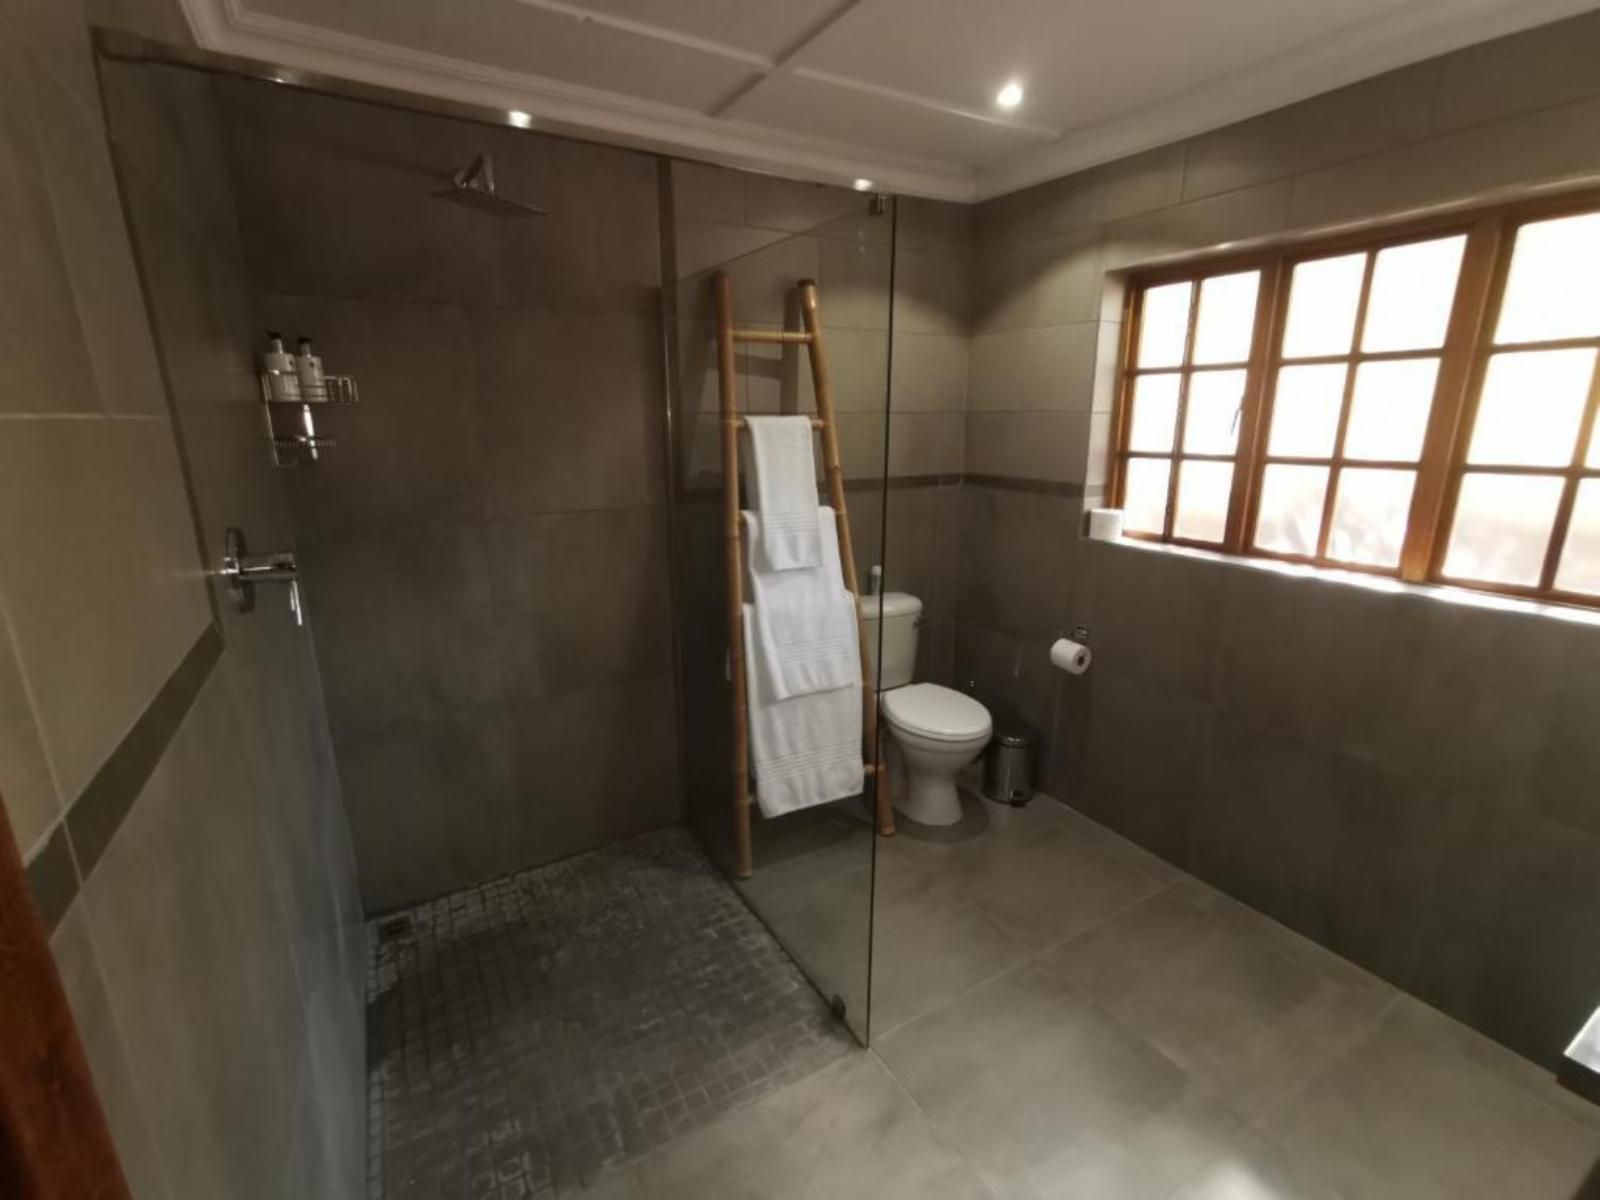 Guest Suites On Connor Willows Bloemfontein Free State South Africa Sepia Tones, Bathroom